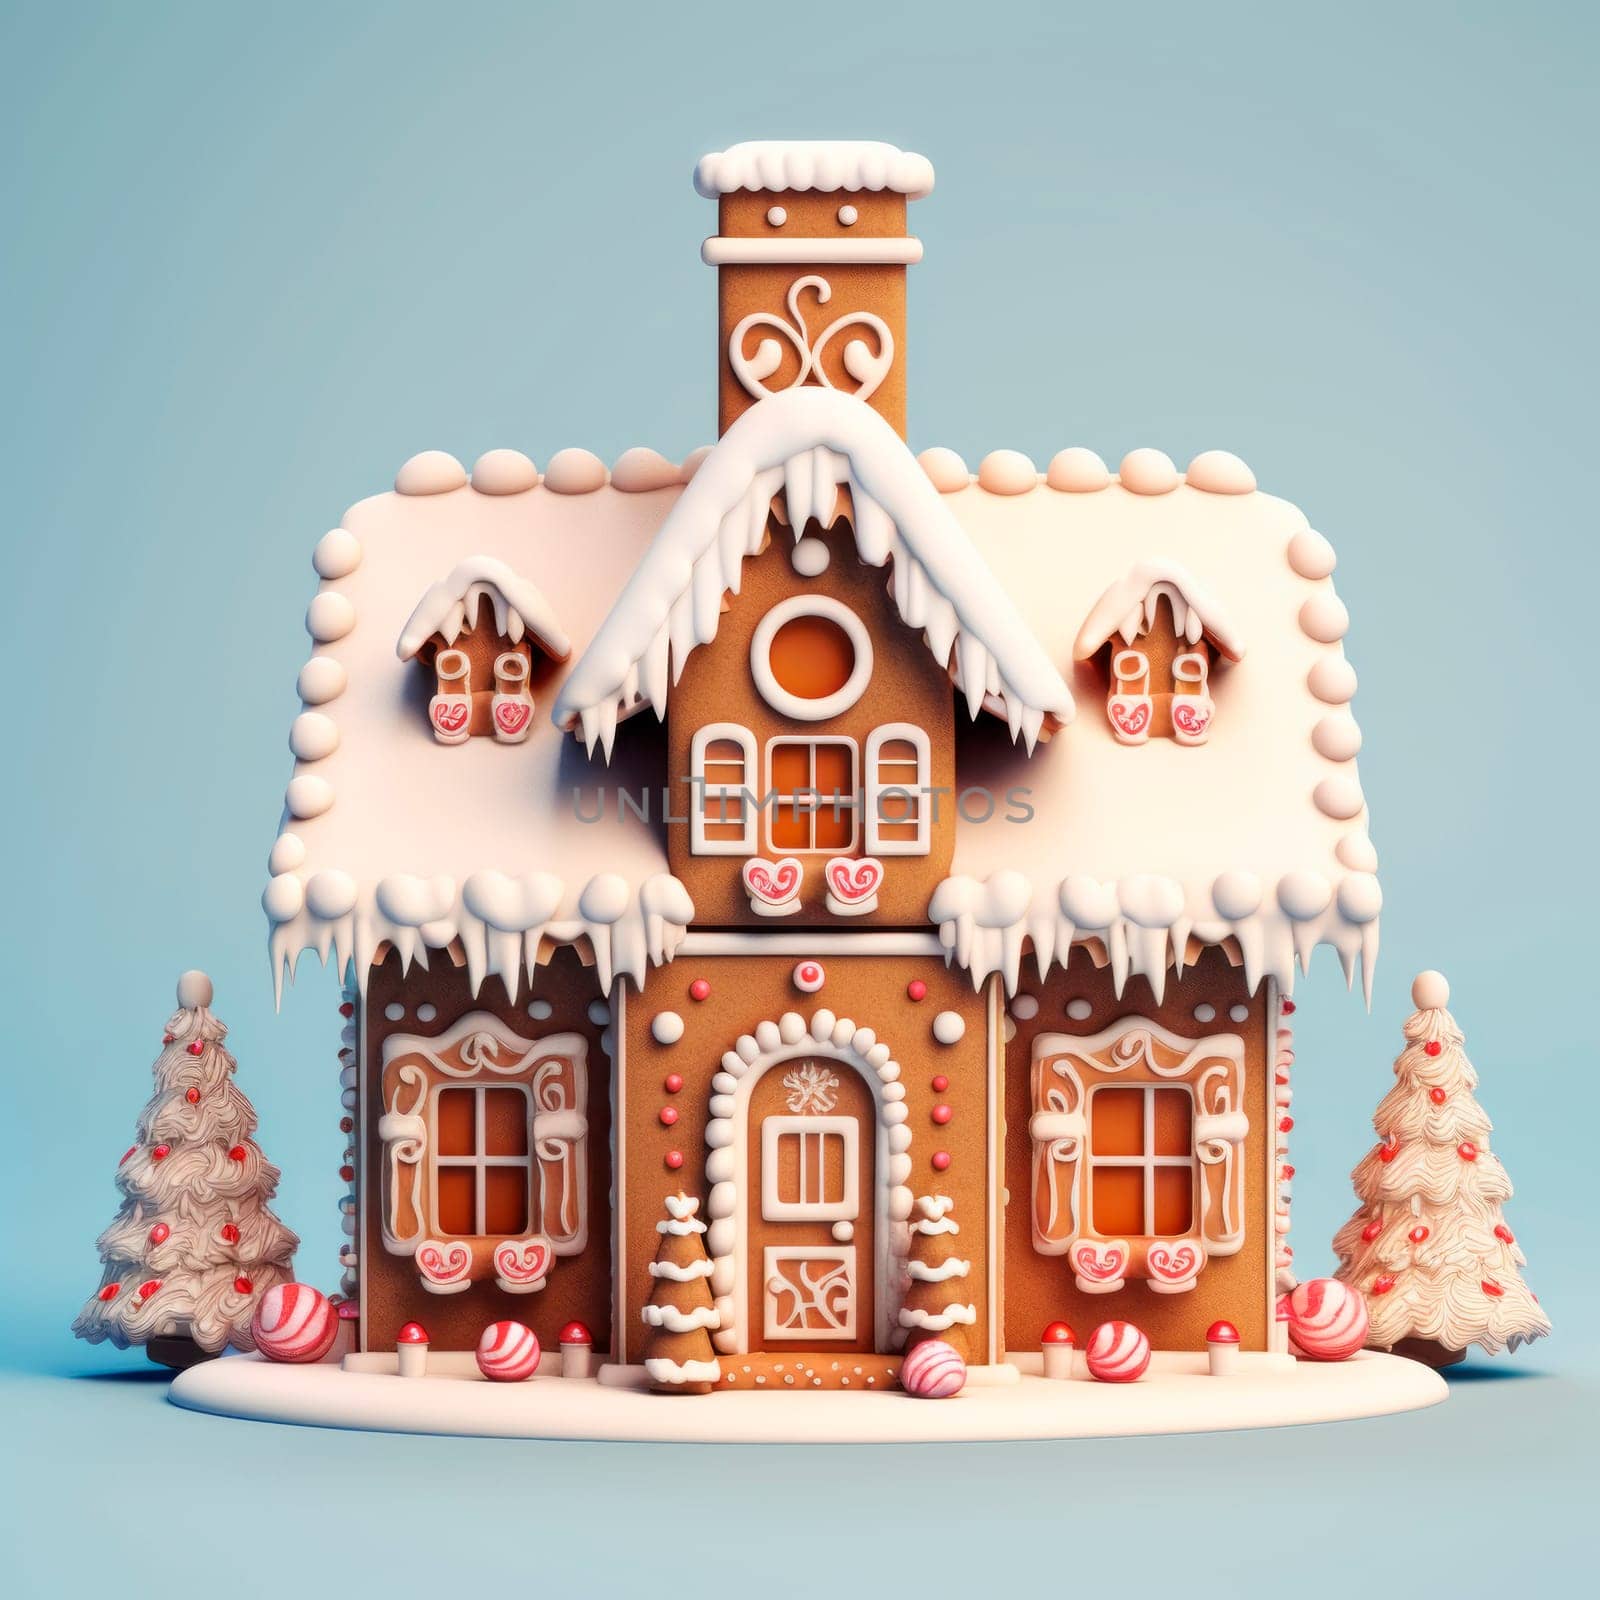 A beautiful fairy-tale Christmas gingerbread house. The concept of Christmas. by Spirina